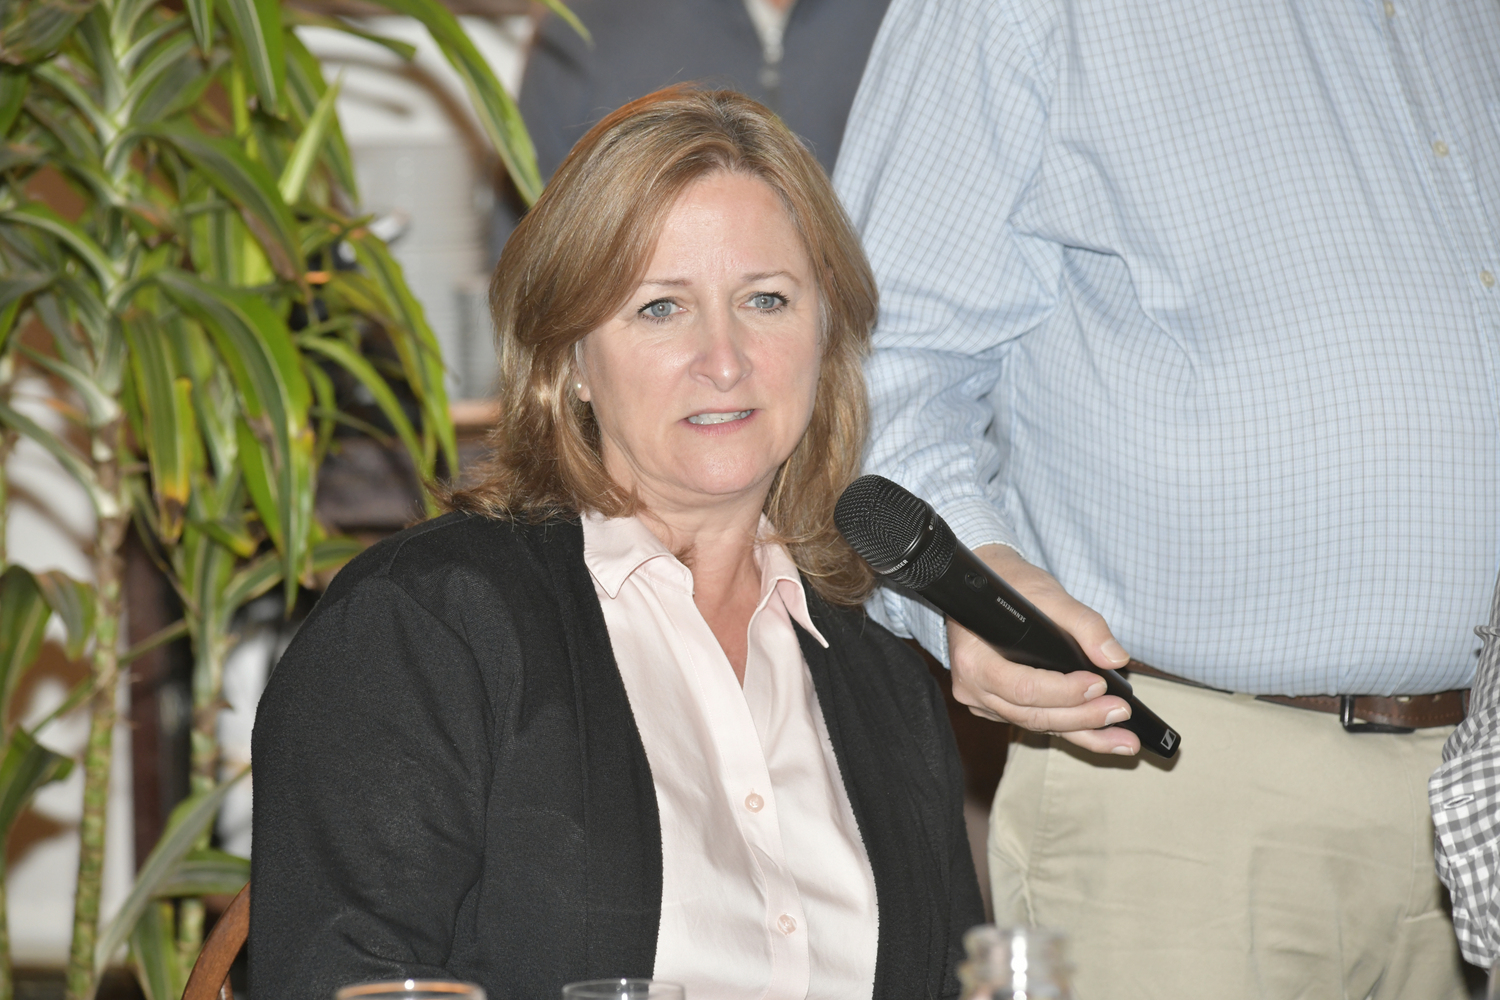 Westhampton Beach Village Mayor Maria Moore poses a question at the Express Session on Thursday.  DANA SHAW